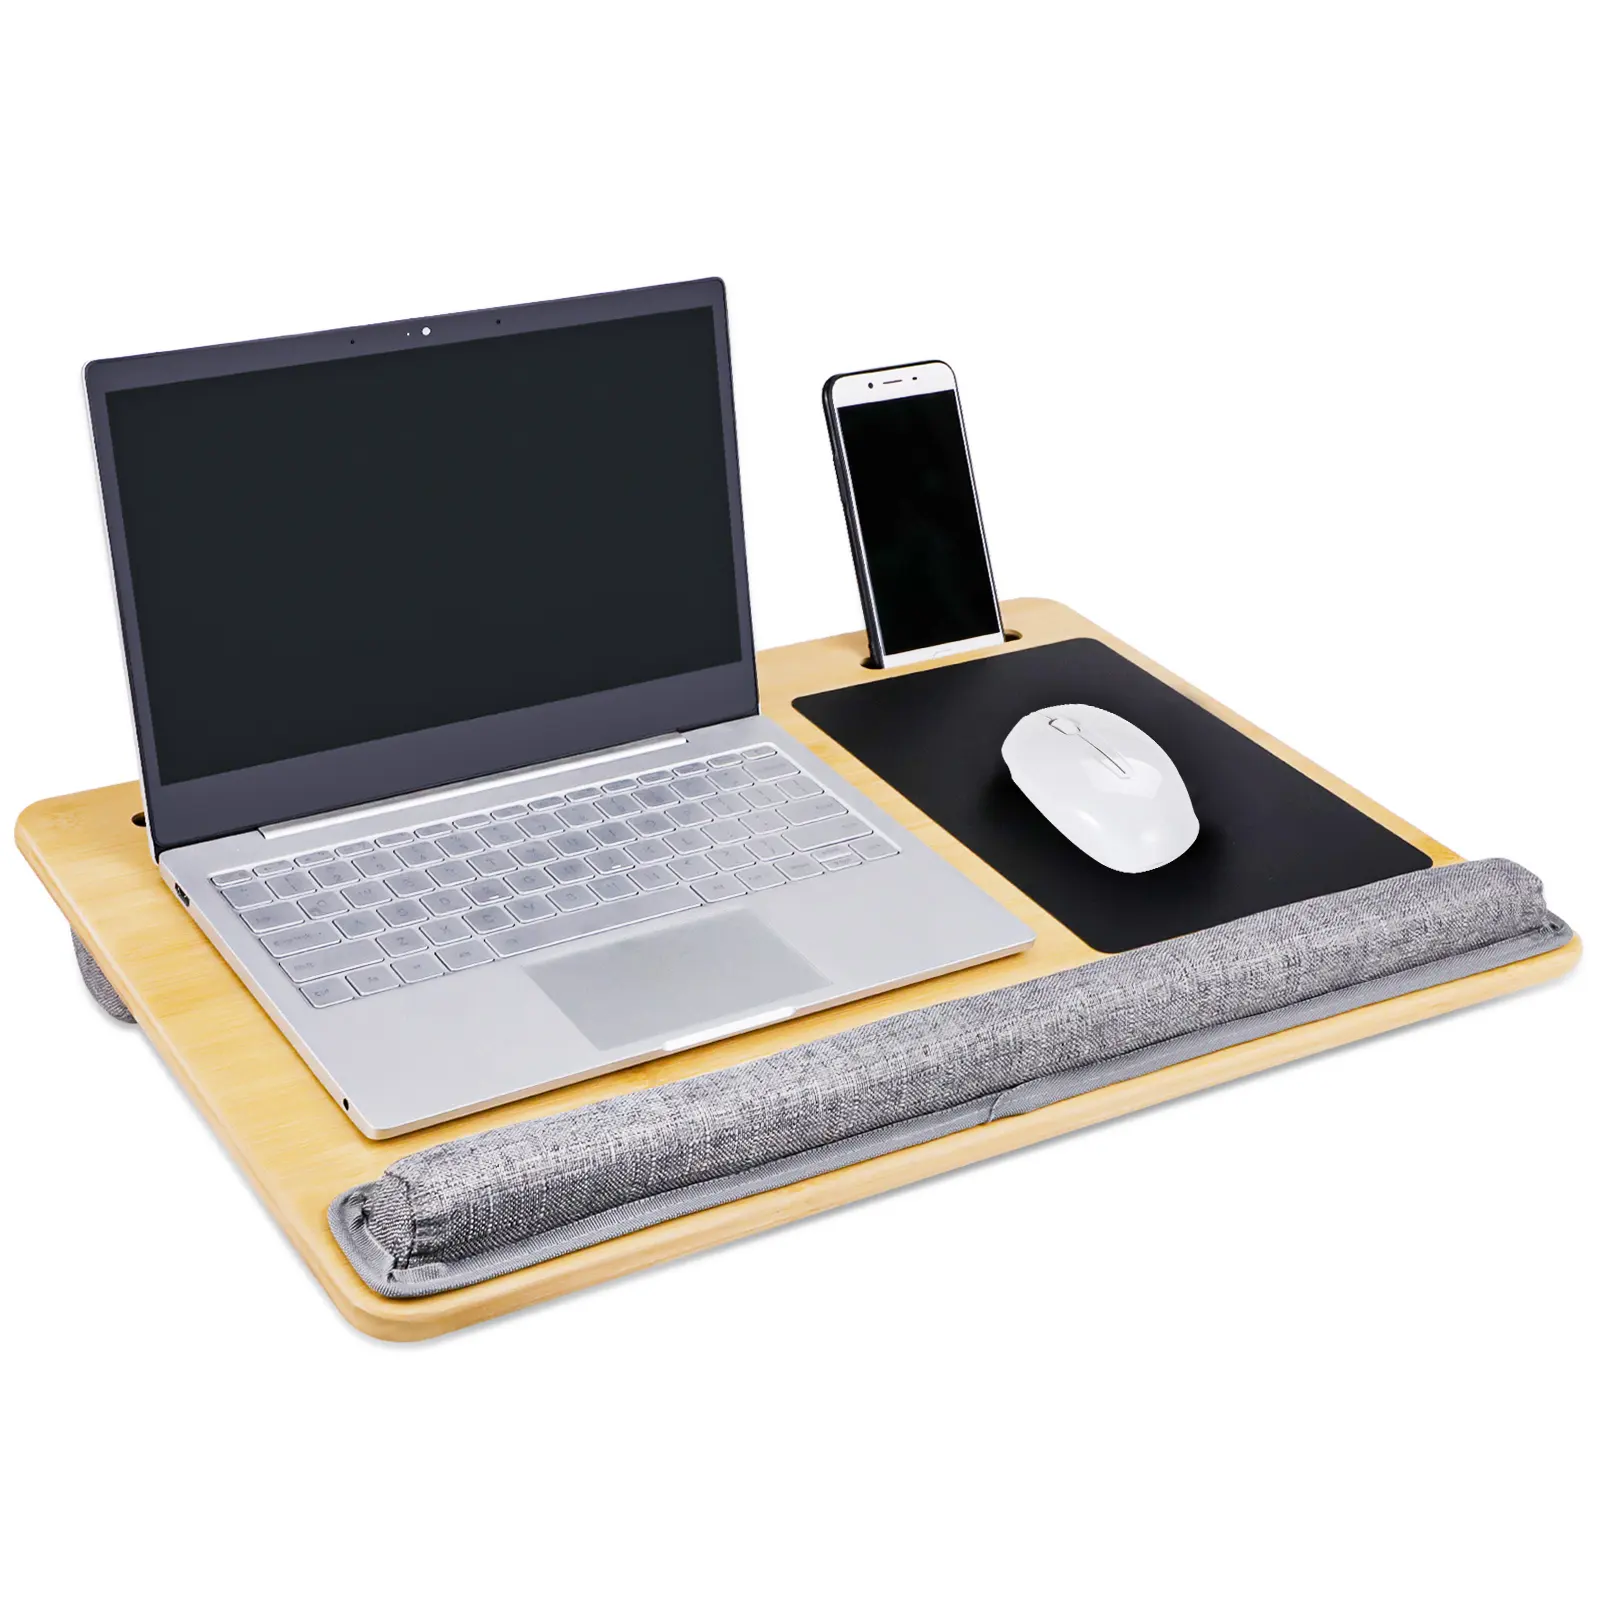 HOSTK Home Office Portable Laptop Desk Soft Pillow Cushion With Handle Bamboo Lap Desk For Pad And Phone Holder